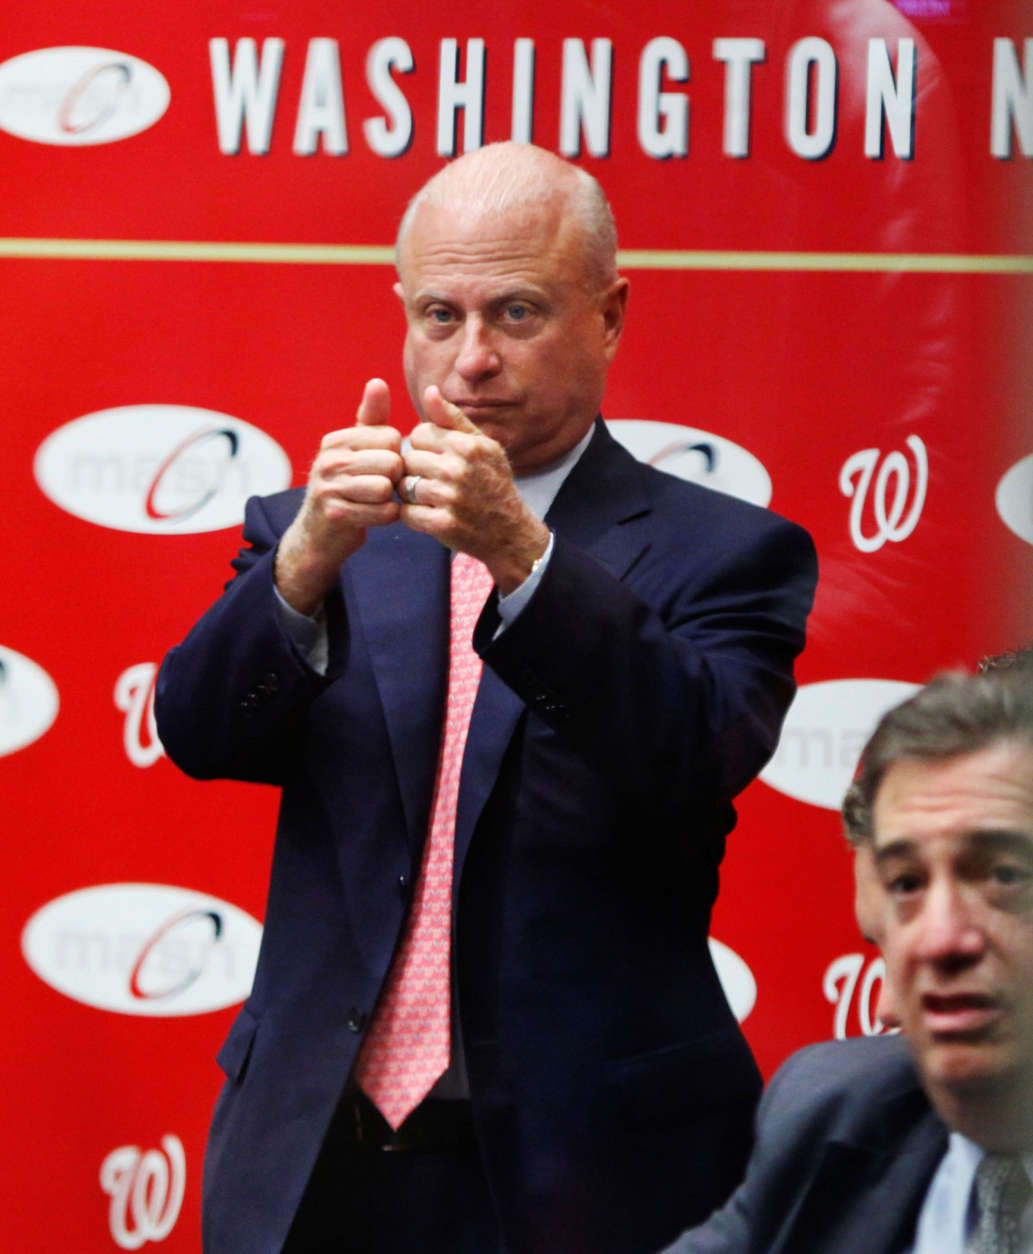 Washington Nationals owner Mark Lerner flashes two thumbs up after the Nationals selected pitcher Stephen Strasburg with the first pick in baseball's draft, at Nationals Park in Washington, Tuesday, June 9, 2009. (AP Photo/Manuel Balce Ceneta)